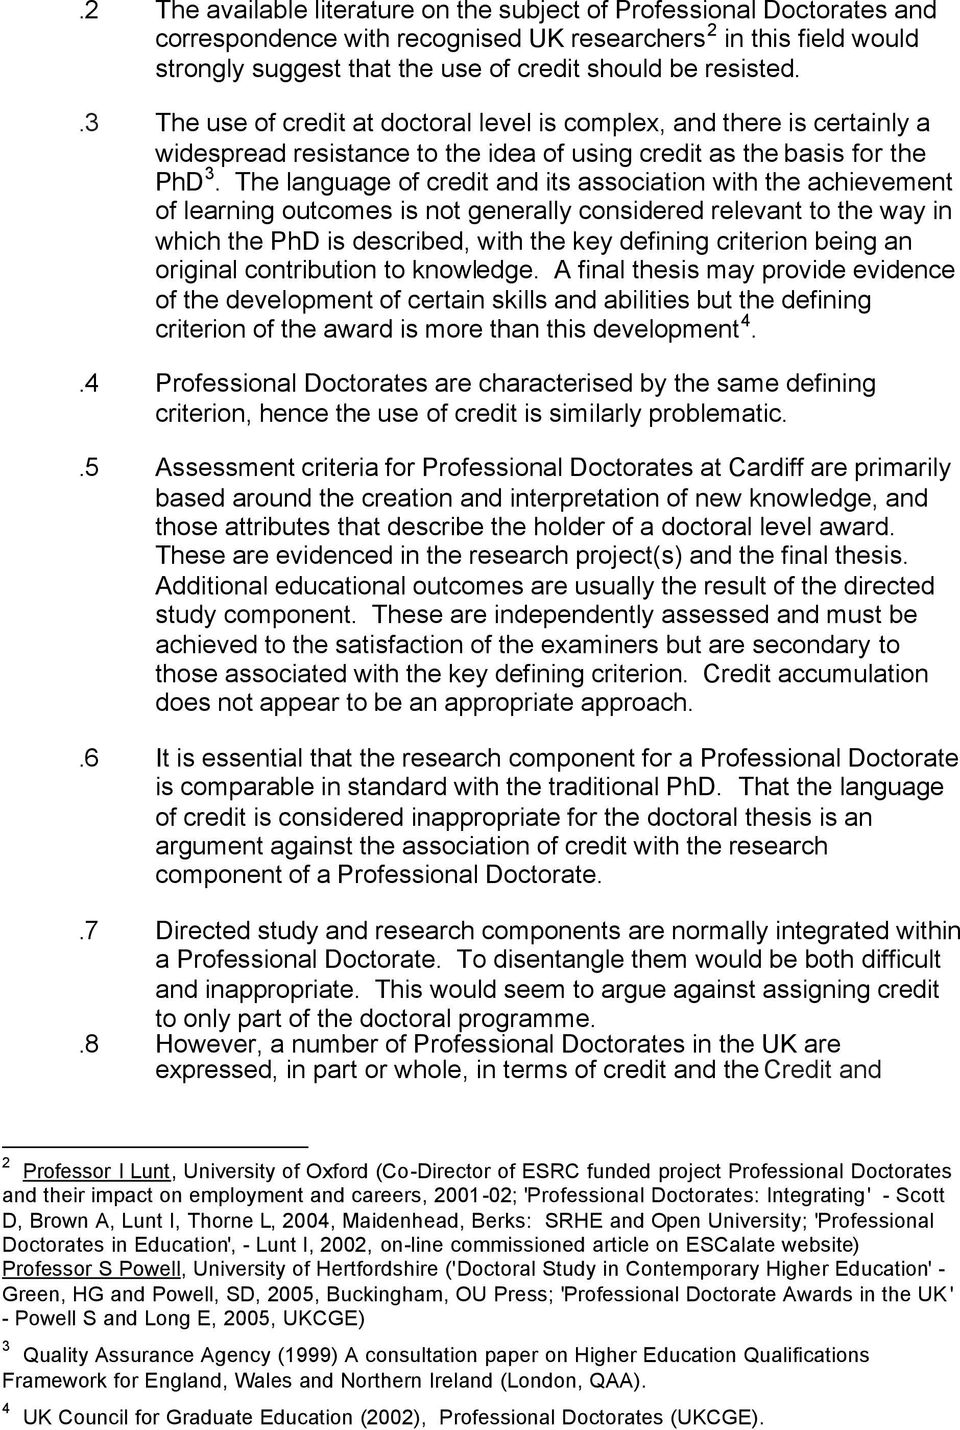 The language of credit and its association with the achievement of learning outcomes is not generally considered relevant to the way in which the PhD is described, with the key defining criterion